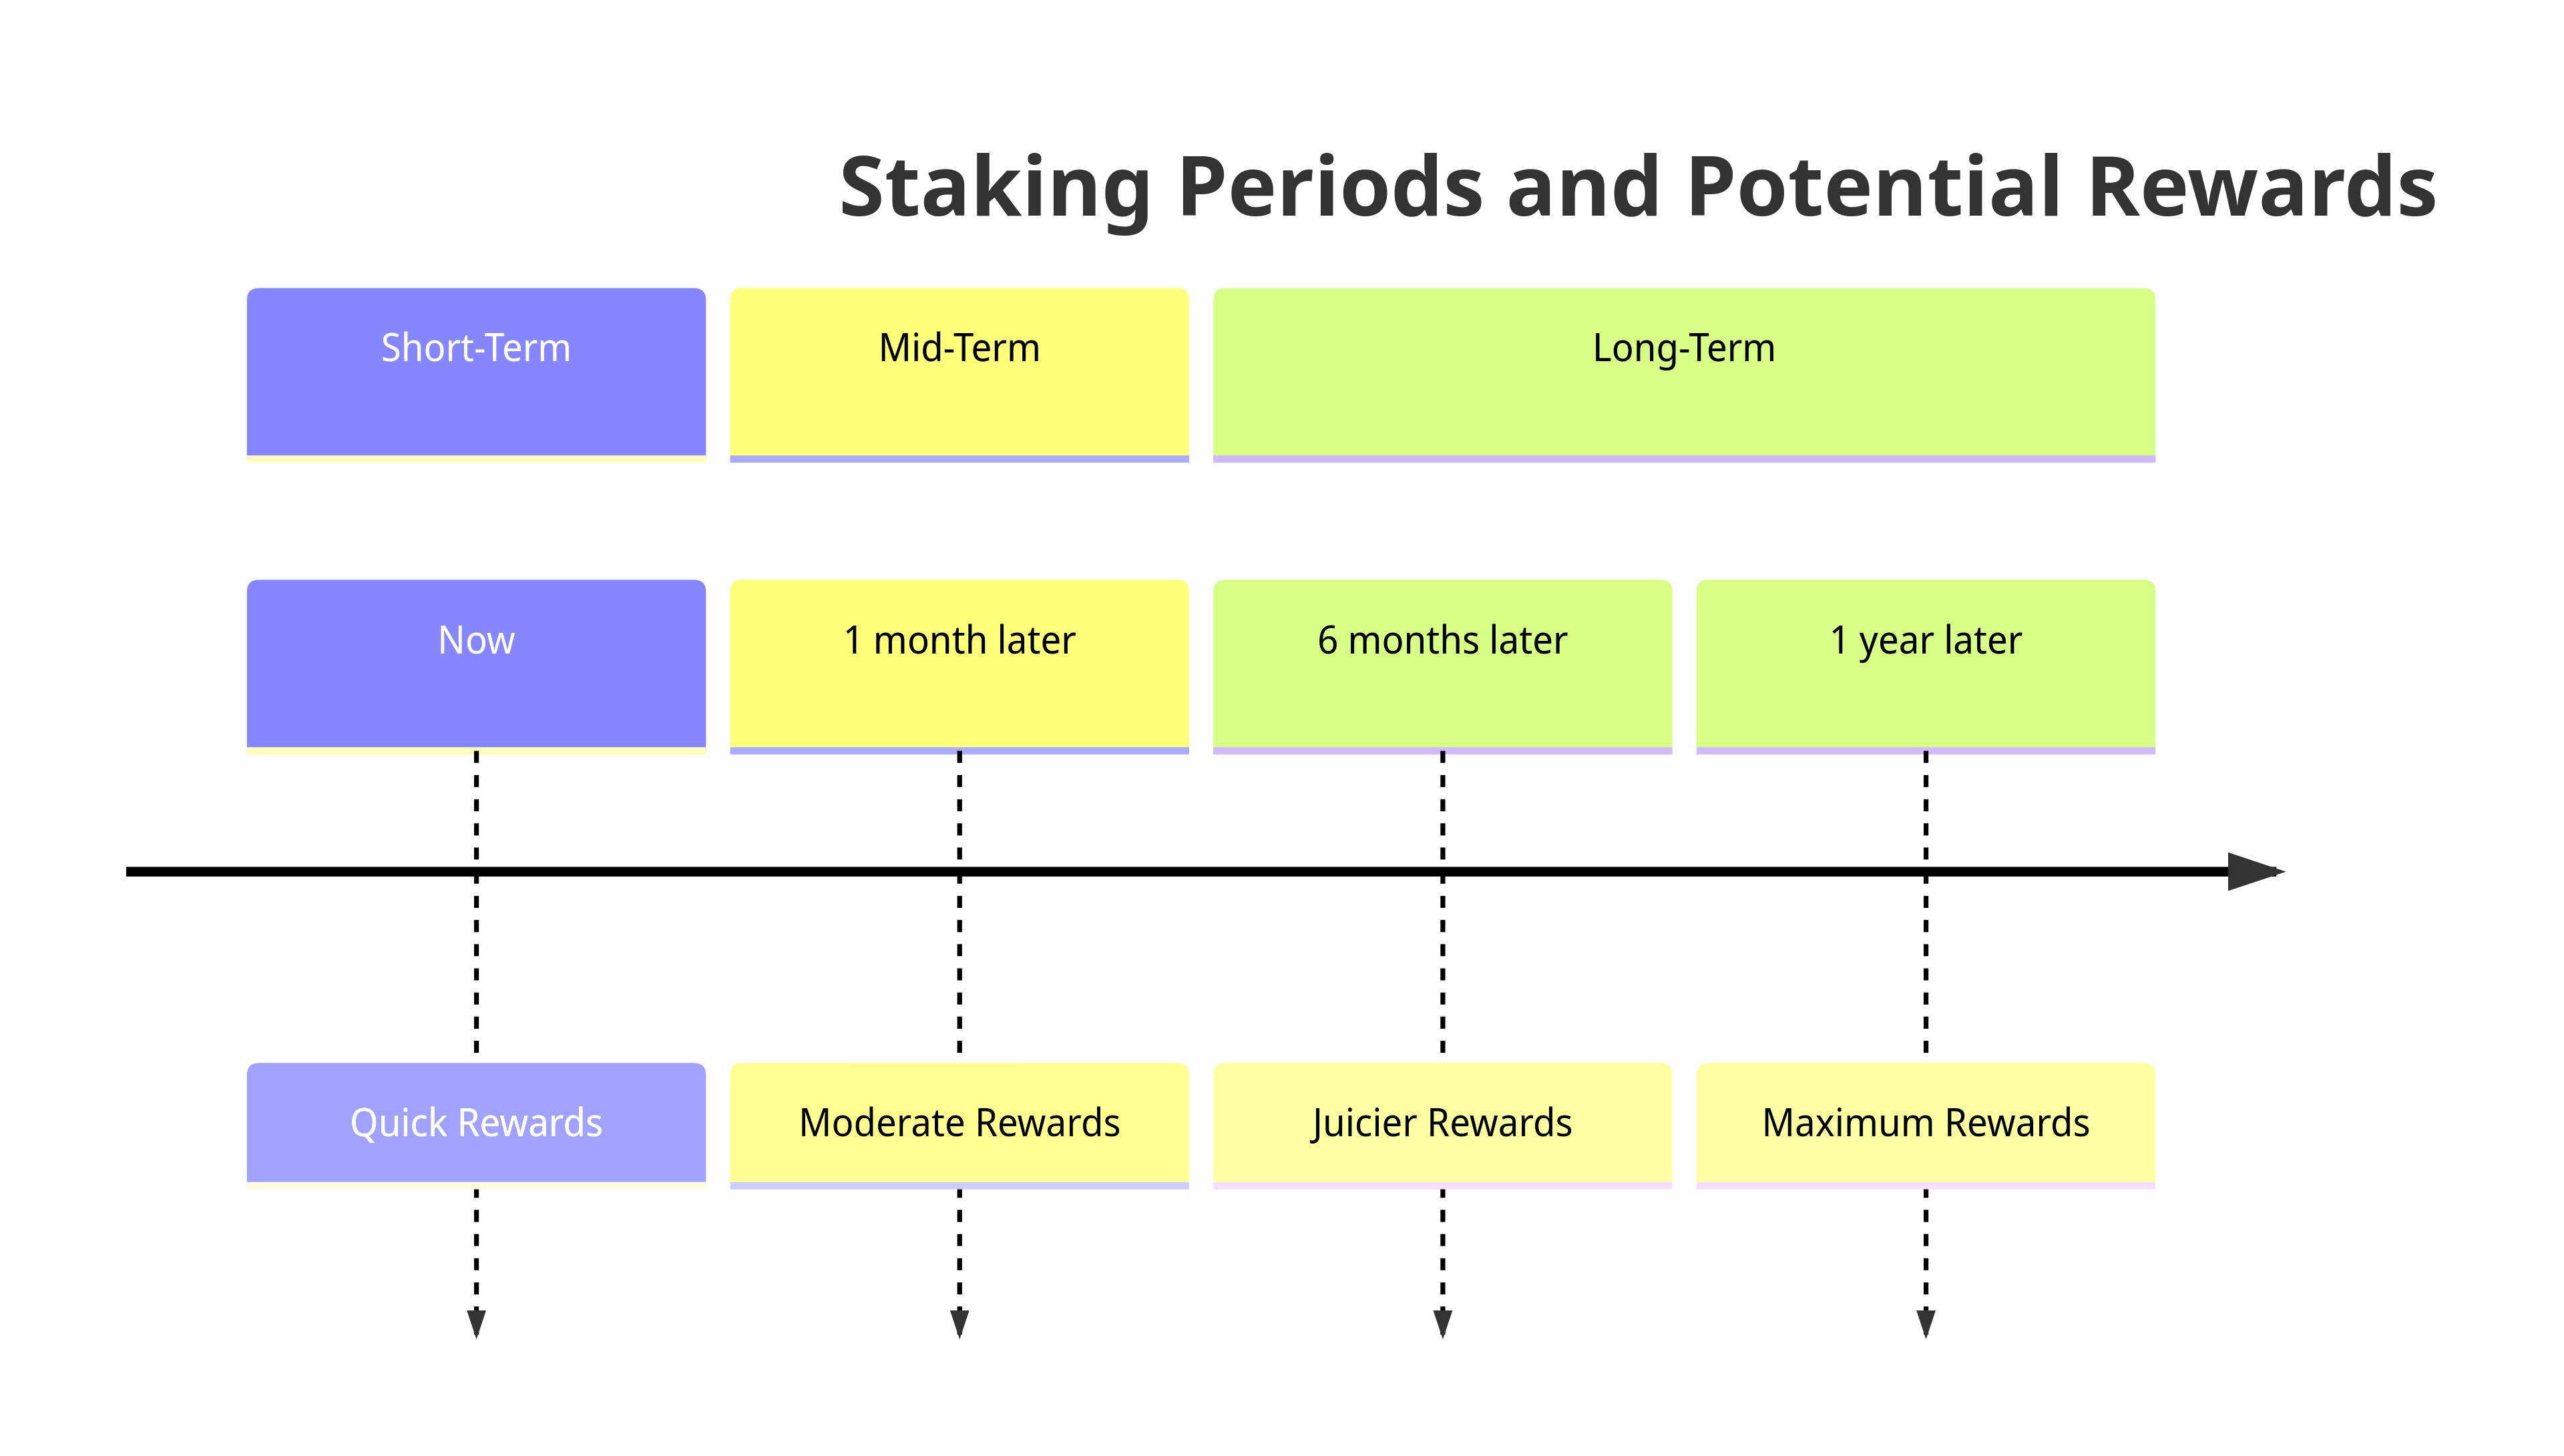 Staking-period-and-potential-rewards